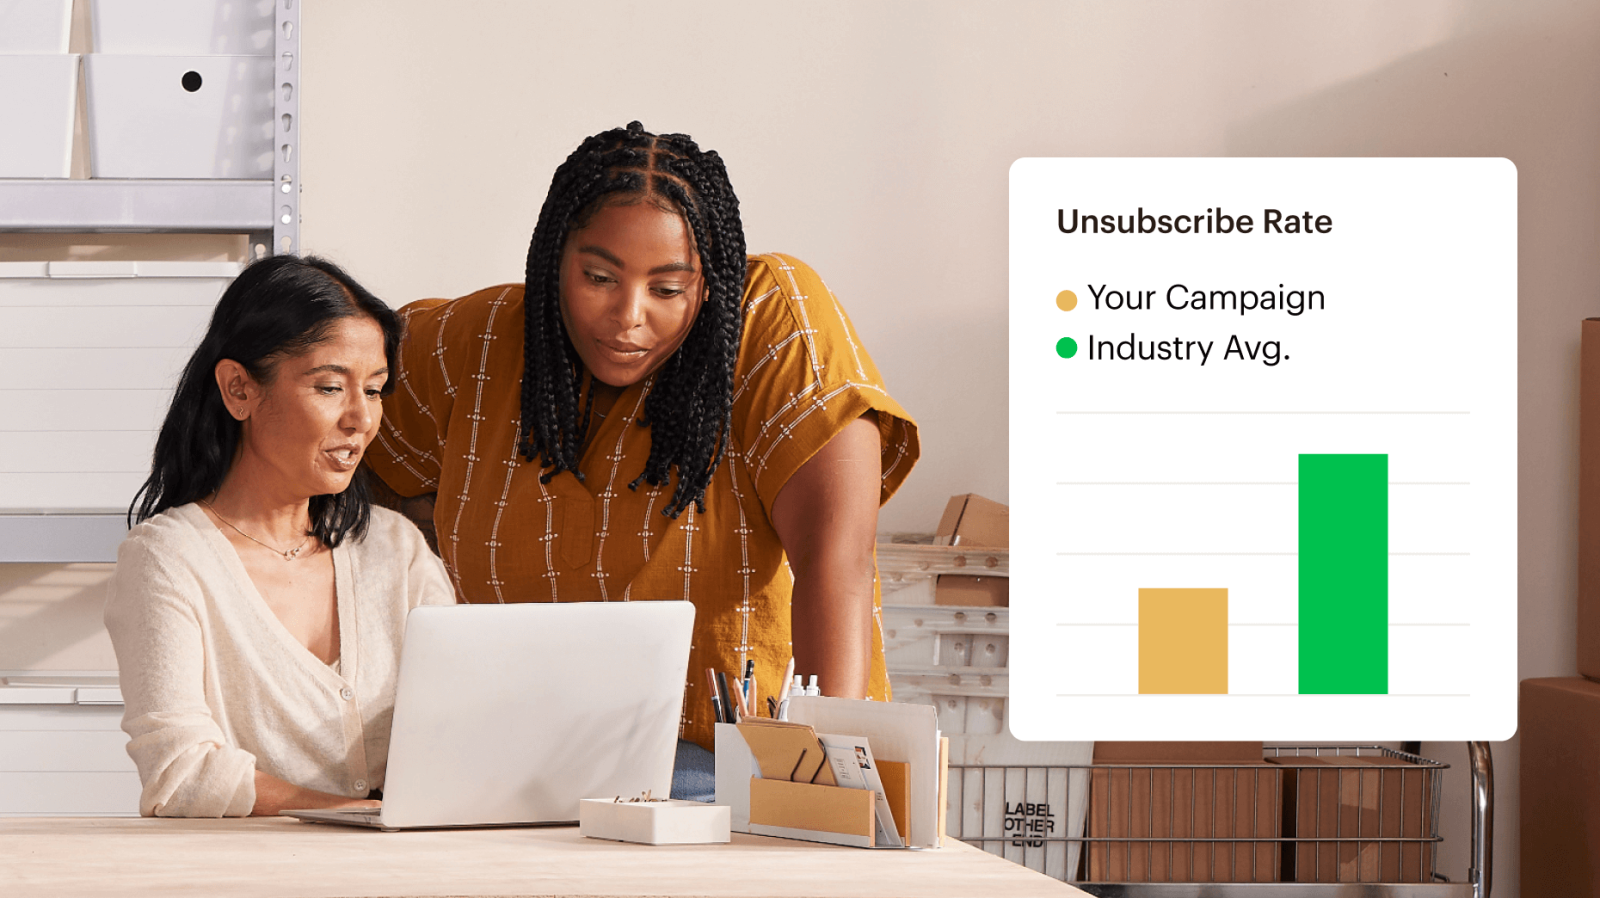 Two small-business owners reviewing unsubscribe rates from their recent email campaign compared to the industry standard.